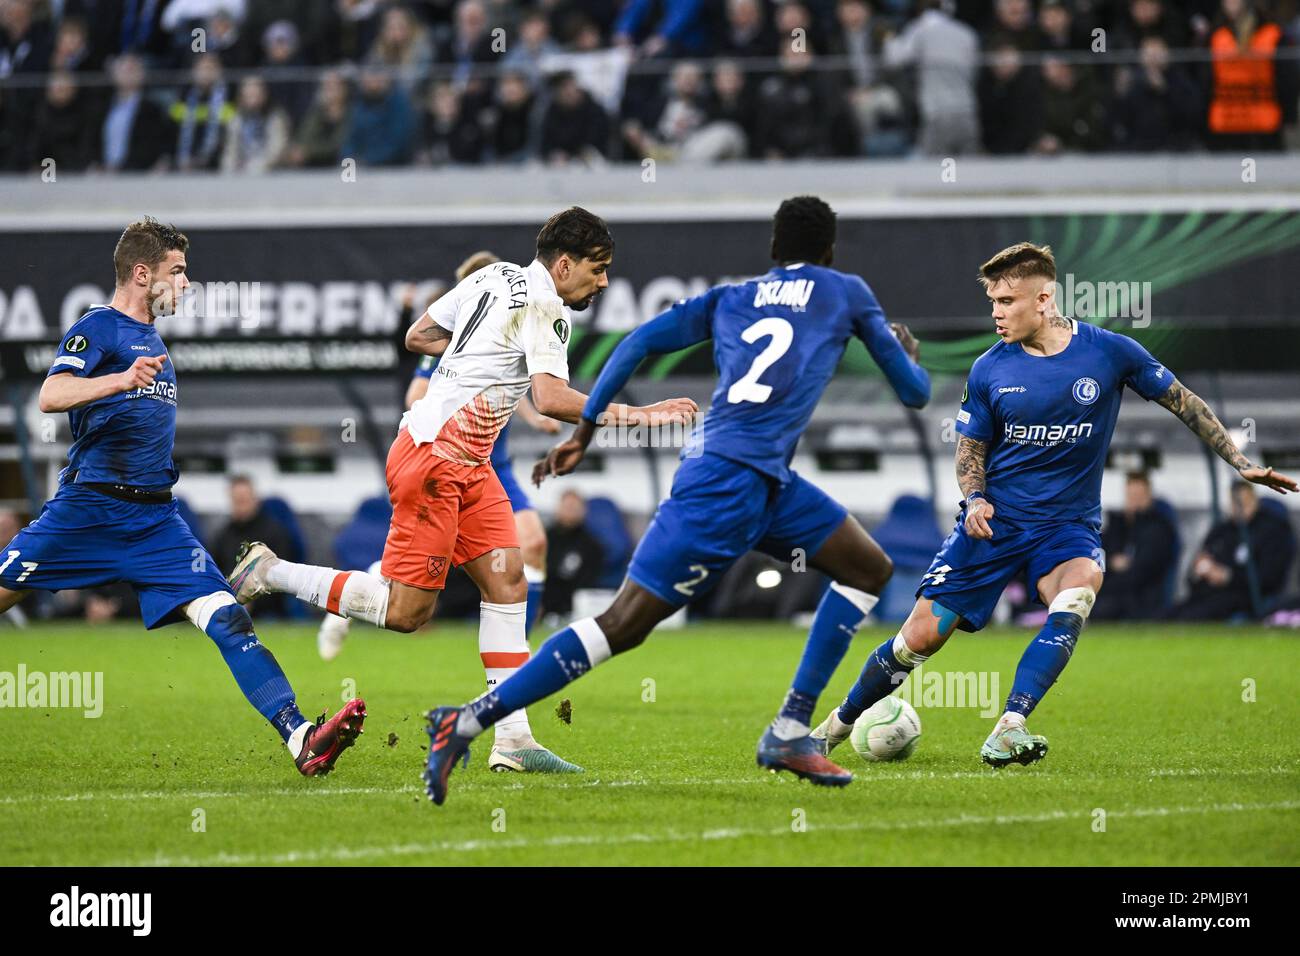 Gent, Belgium. 13th Apr, 2023. Gent's Hugo Cuypers, West Ham's Lucas  Paqueta and Gent's Kamil Piatkowski pictured in action during a soccer game  between Belgian KAA Gent and English West Ham United